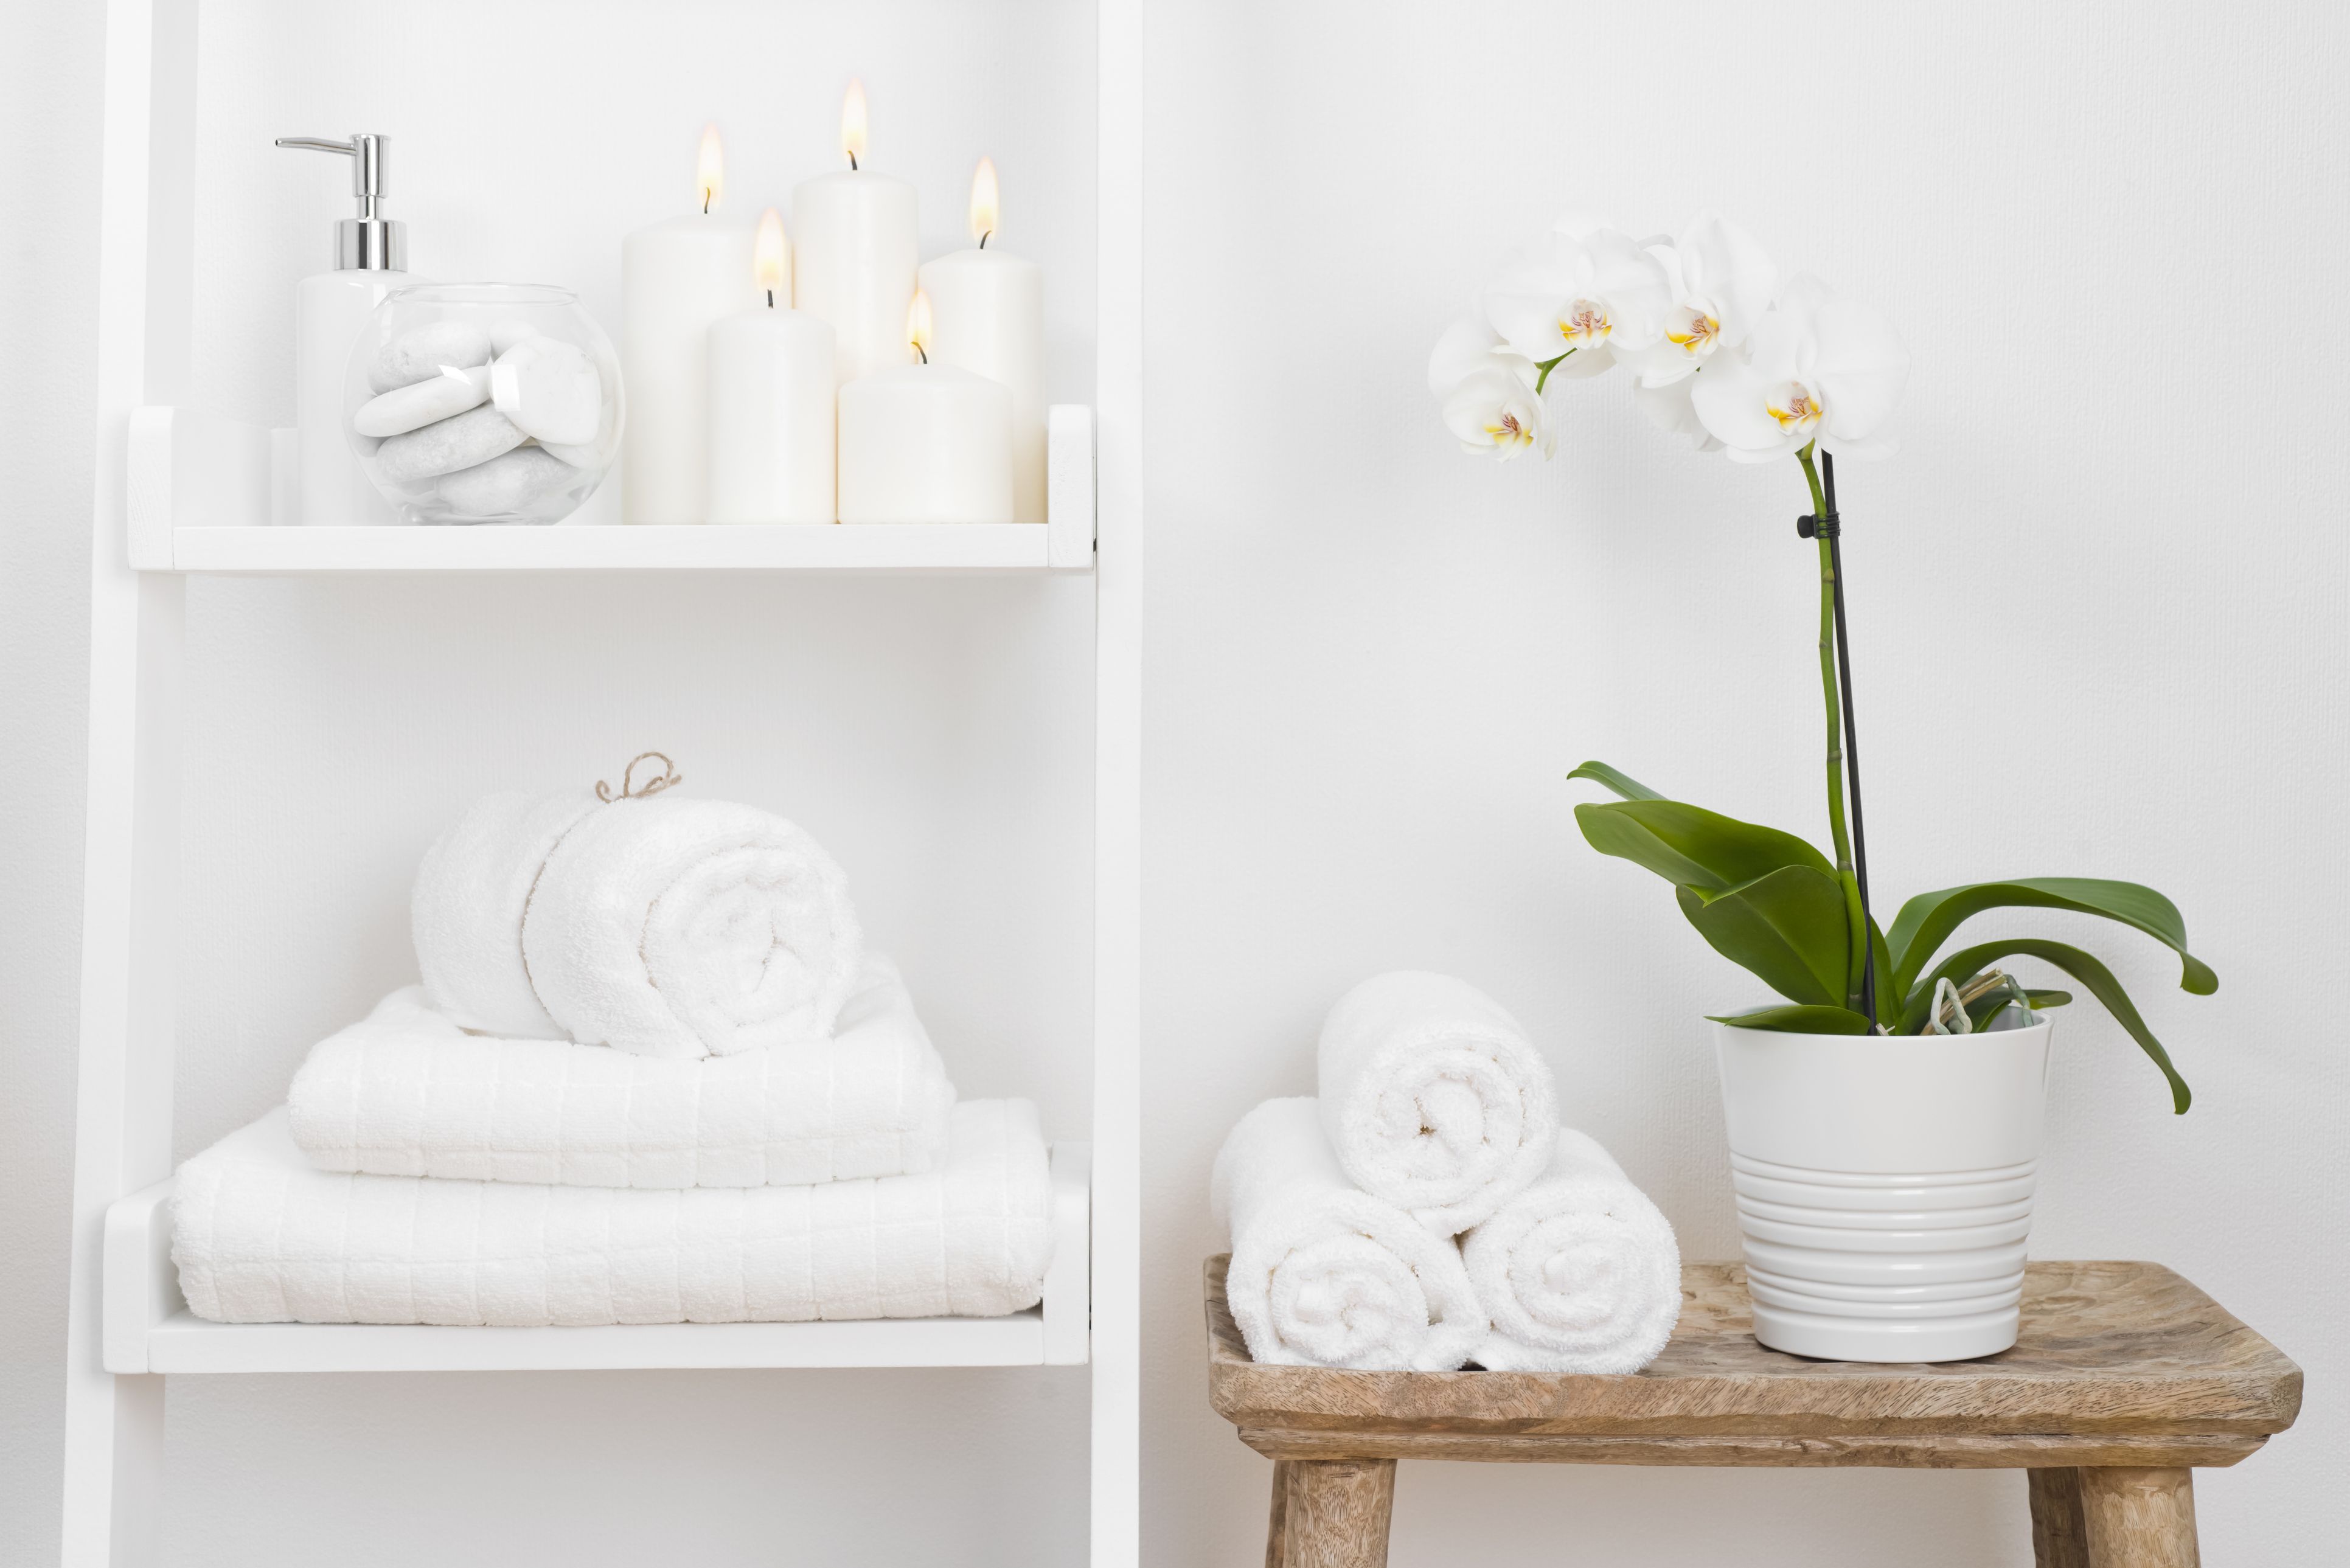 Bath Sheets vs Towels: What's The Difference?